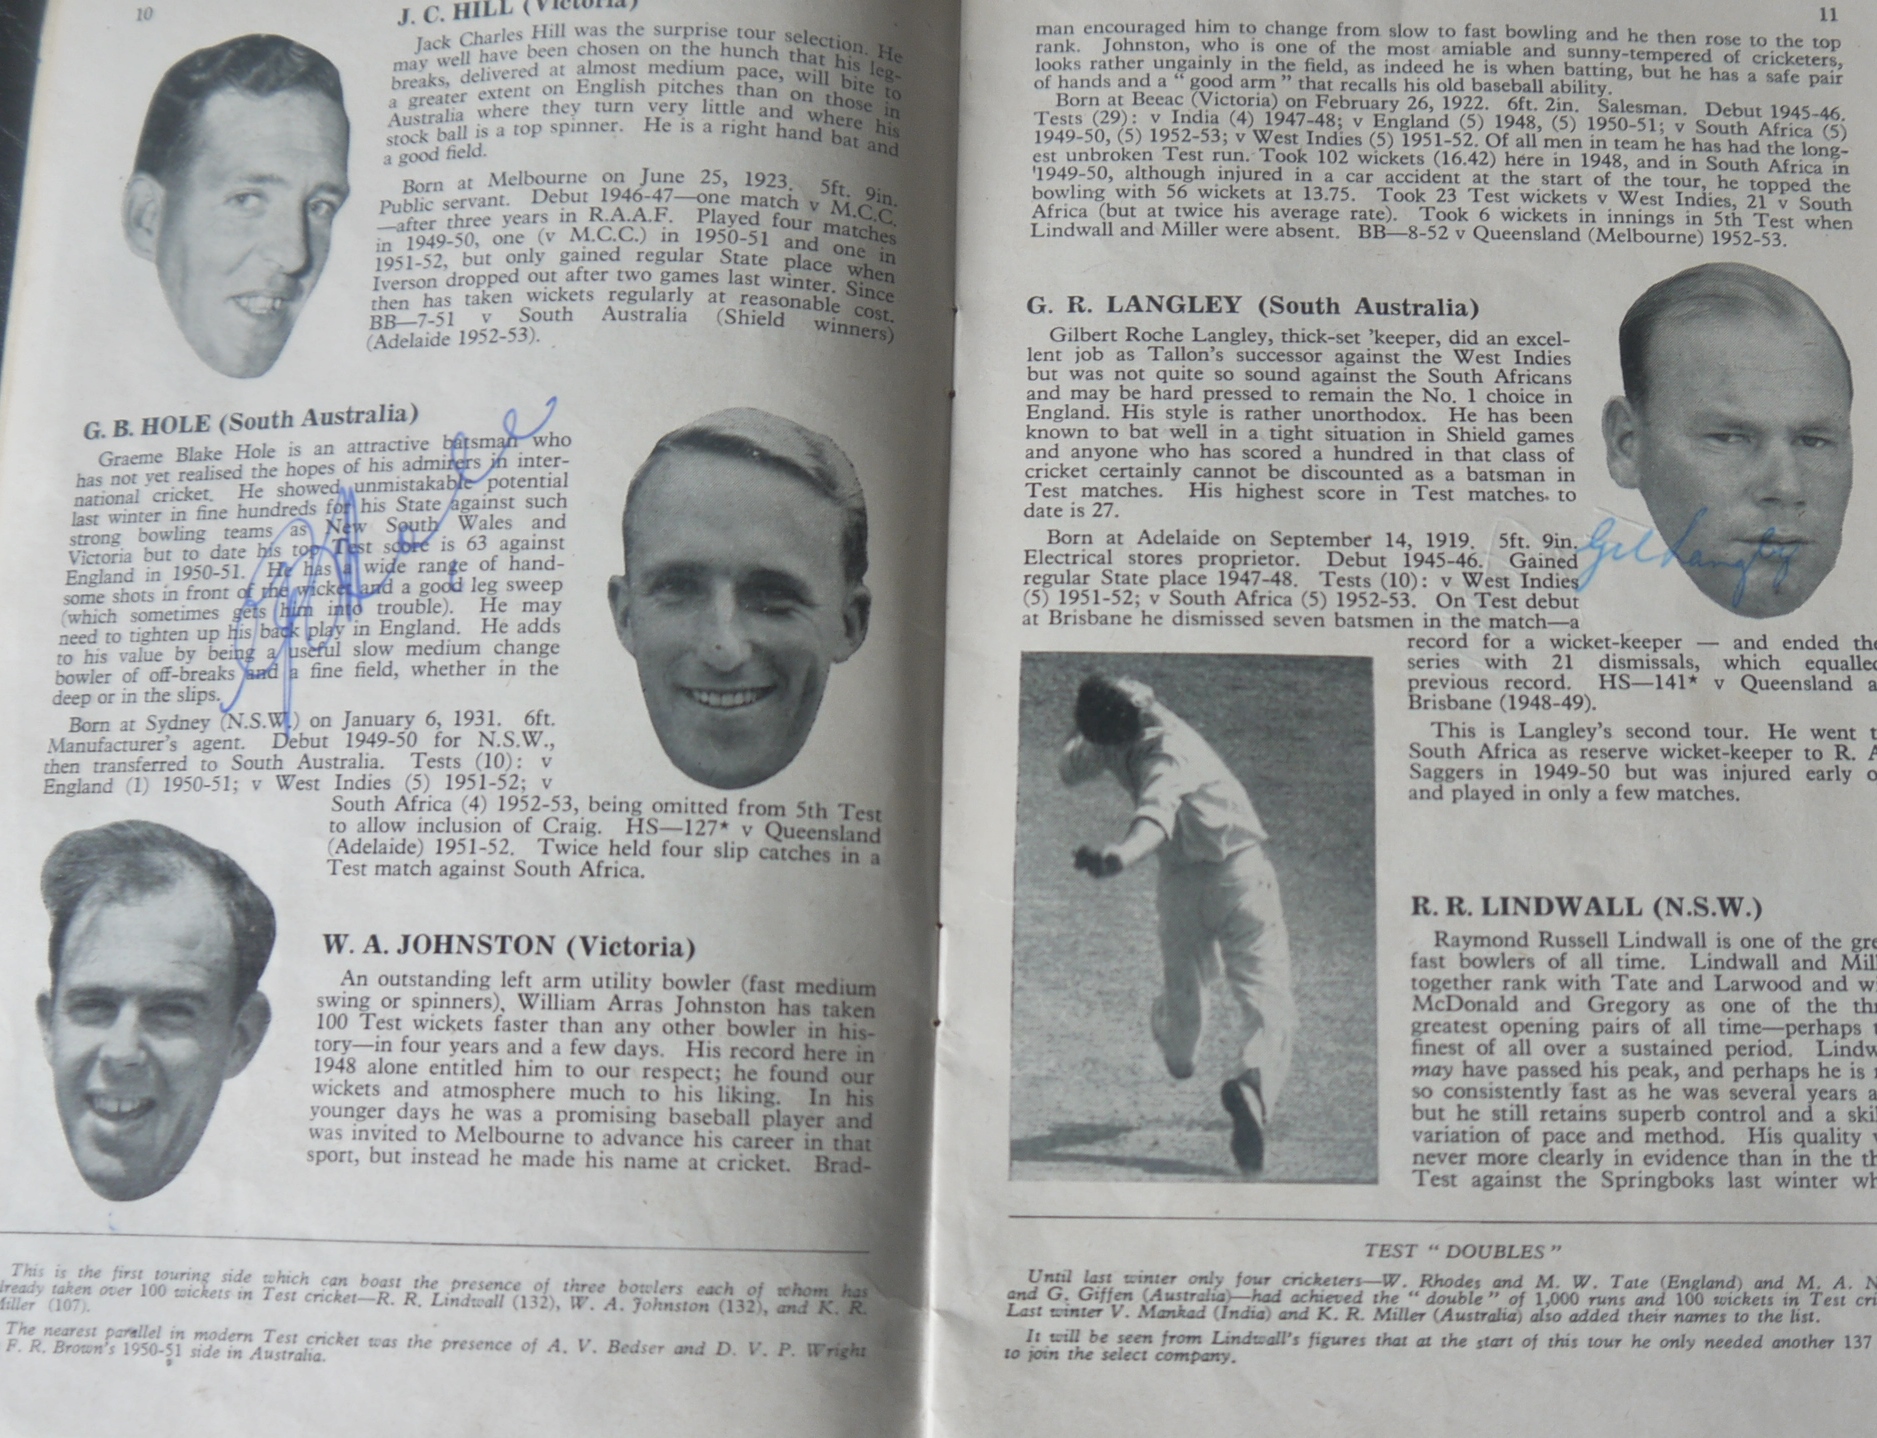 CRICKET AUSTRALIA 1953 TOUR BROCHURE SIGNED BY 5 PLAYERS - Image 2 of 2